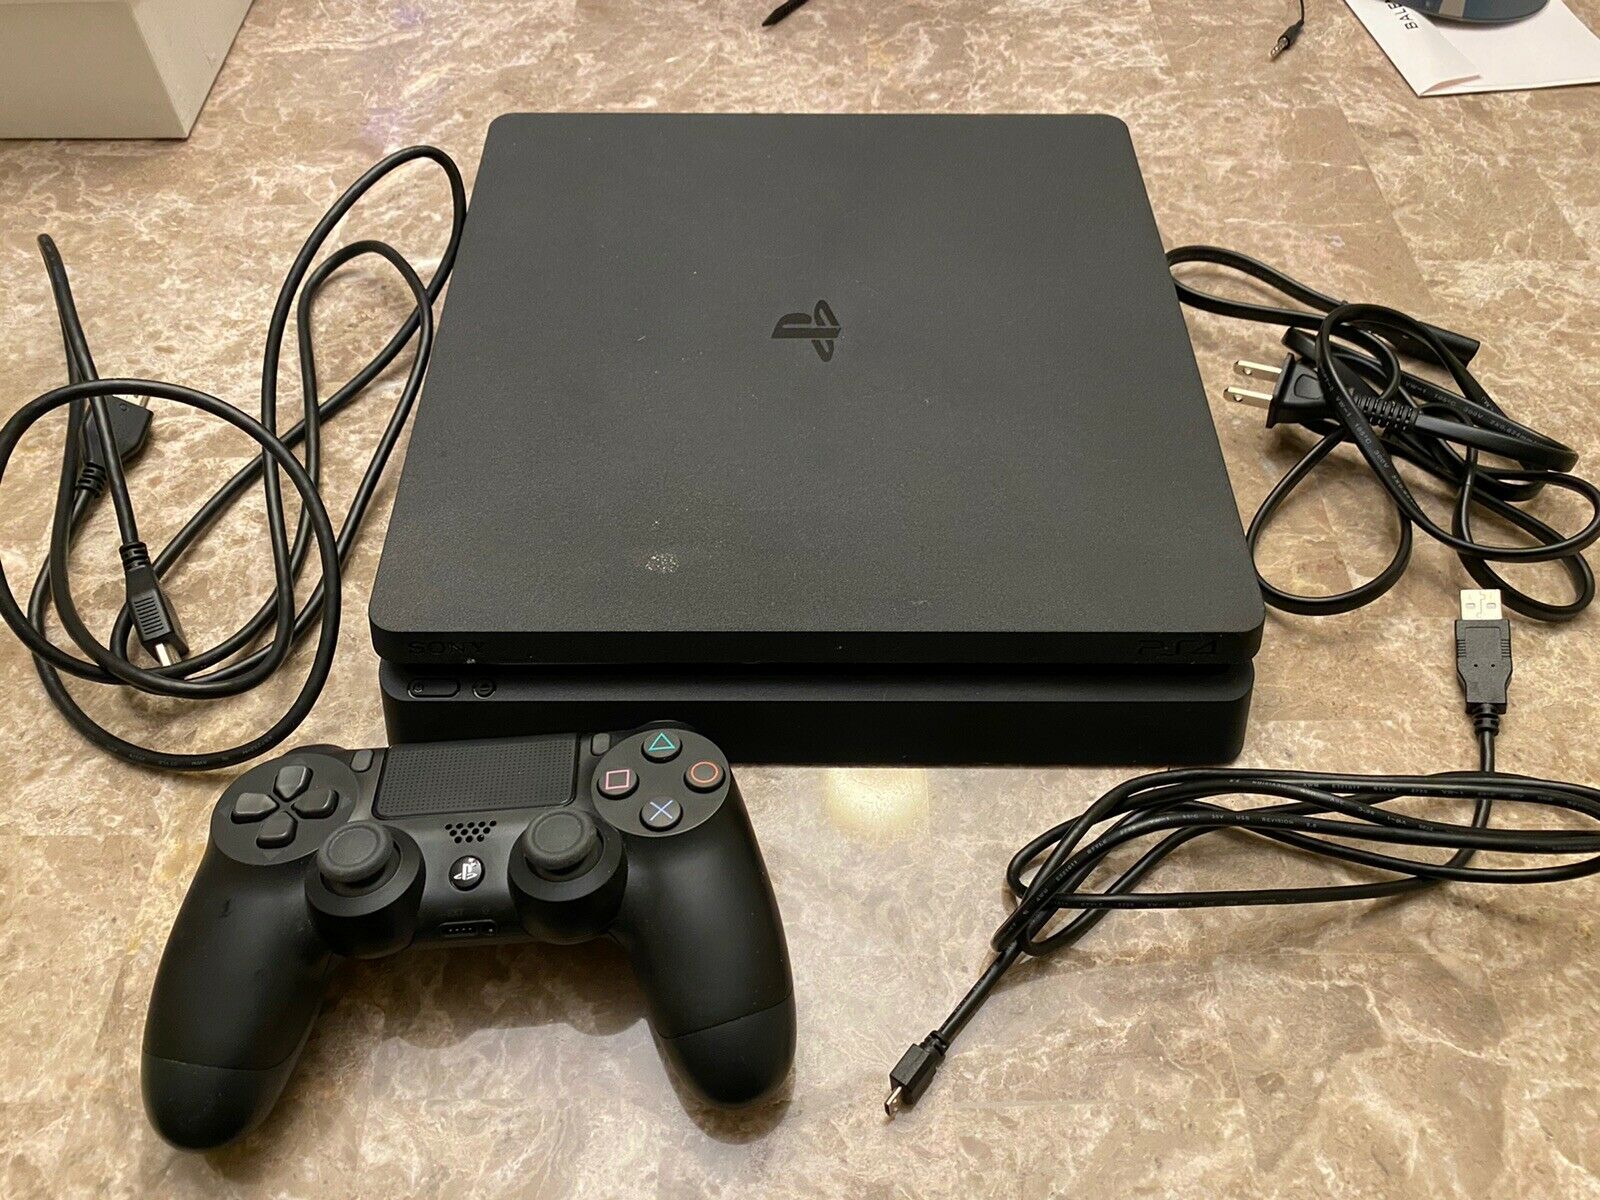 SONY PLAYSTATION 4 SLIM 500GB BLACK WITH CONTROLLER WORKING PERFECTLY